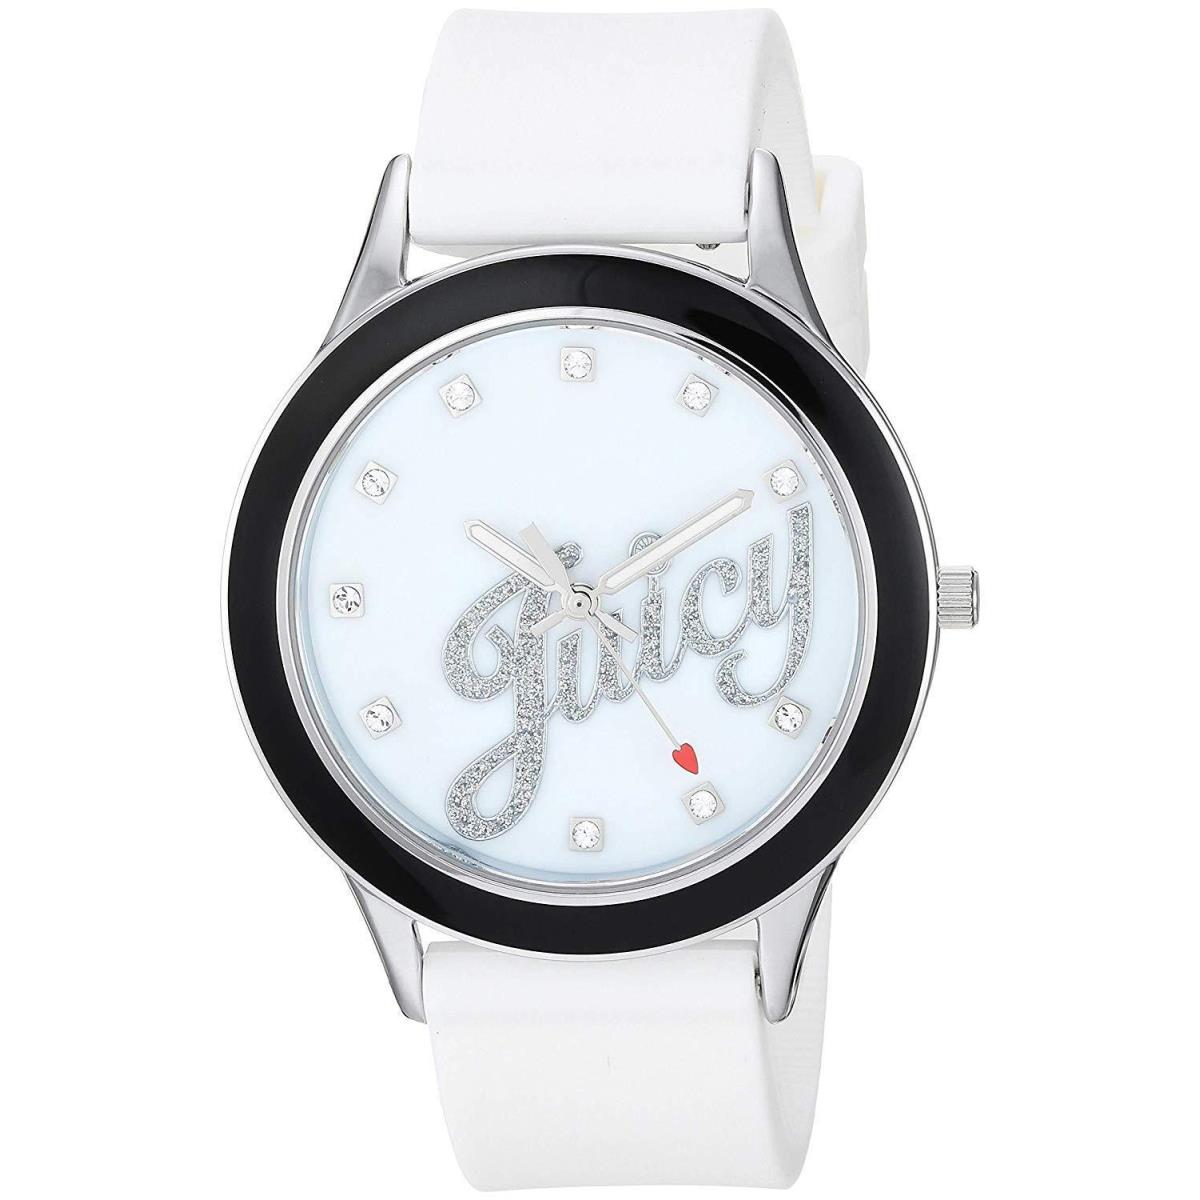 Juicy Couture watch  - White Dial, Multicolor Band, Silver Bezel 2